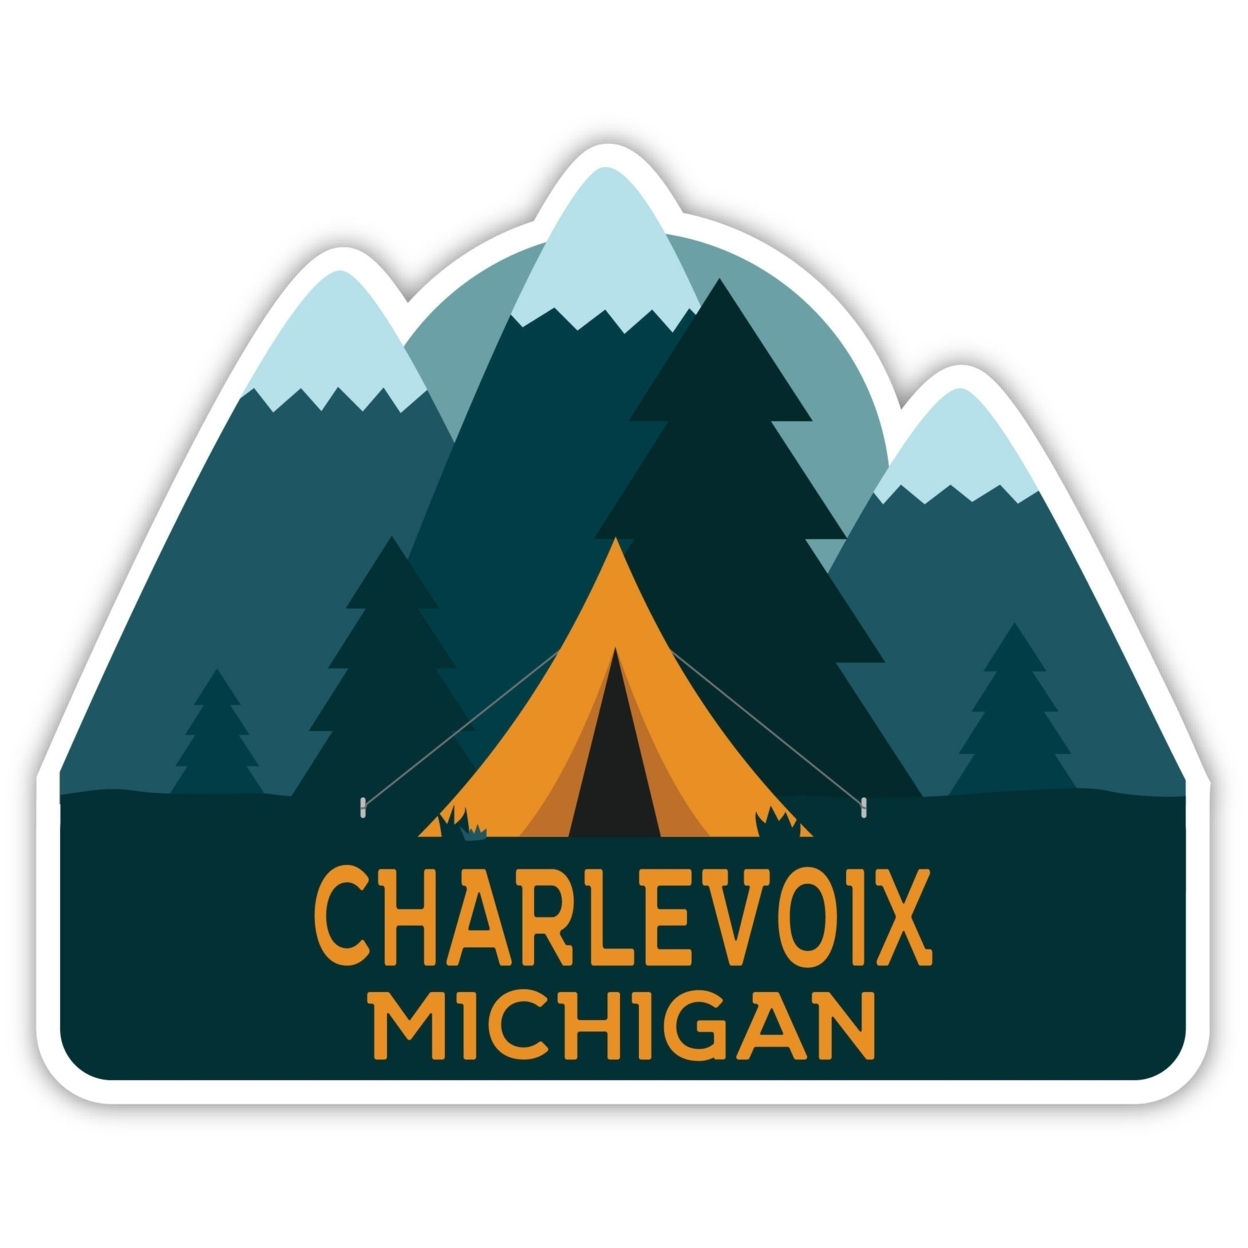 Charlevoix Michigan Souvenir Decorative Stickers (Choose Theme And Size) - 4-Pack, 4-Inch, Adventures Awaits